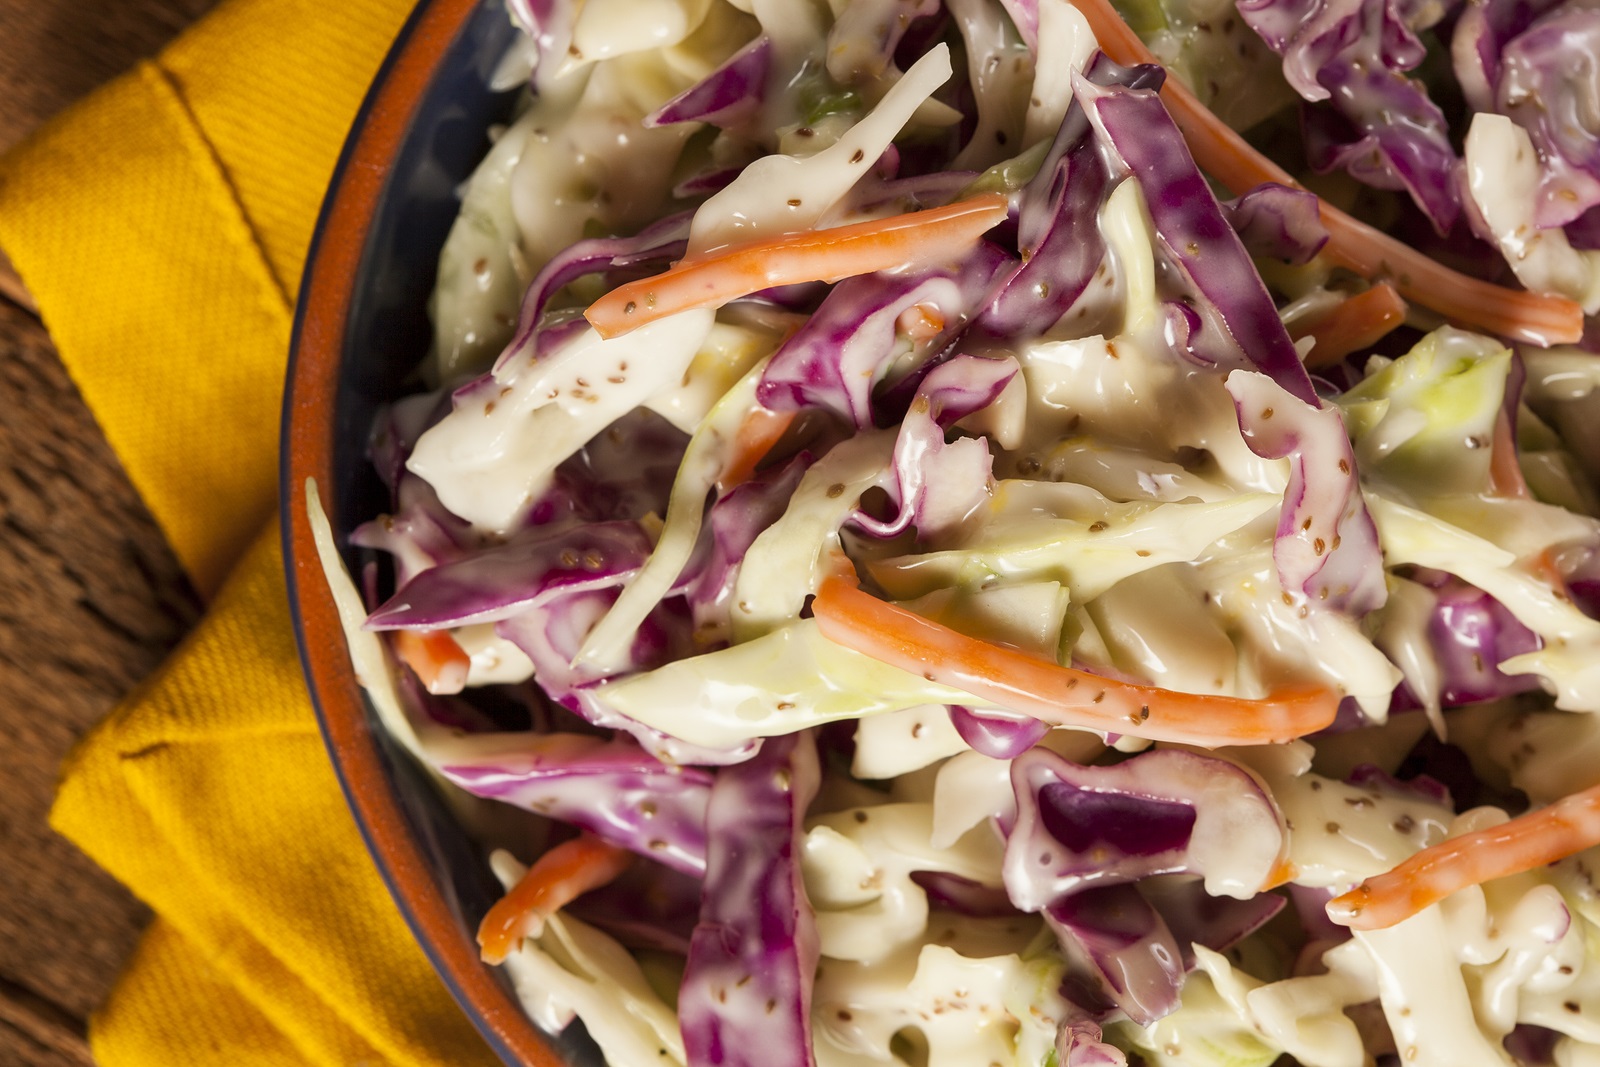 Homemade Coleslaw With Shredded Cabbage And Lettuce